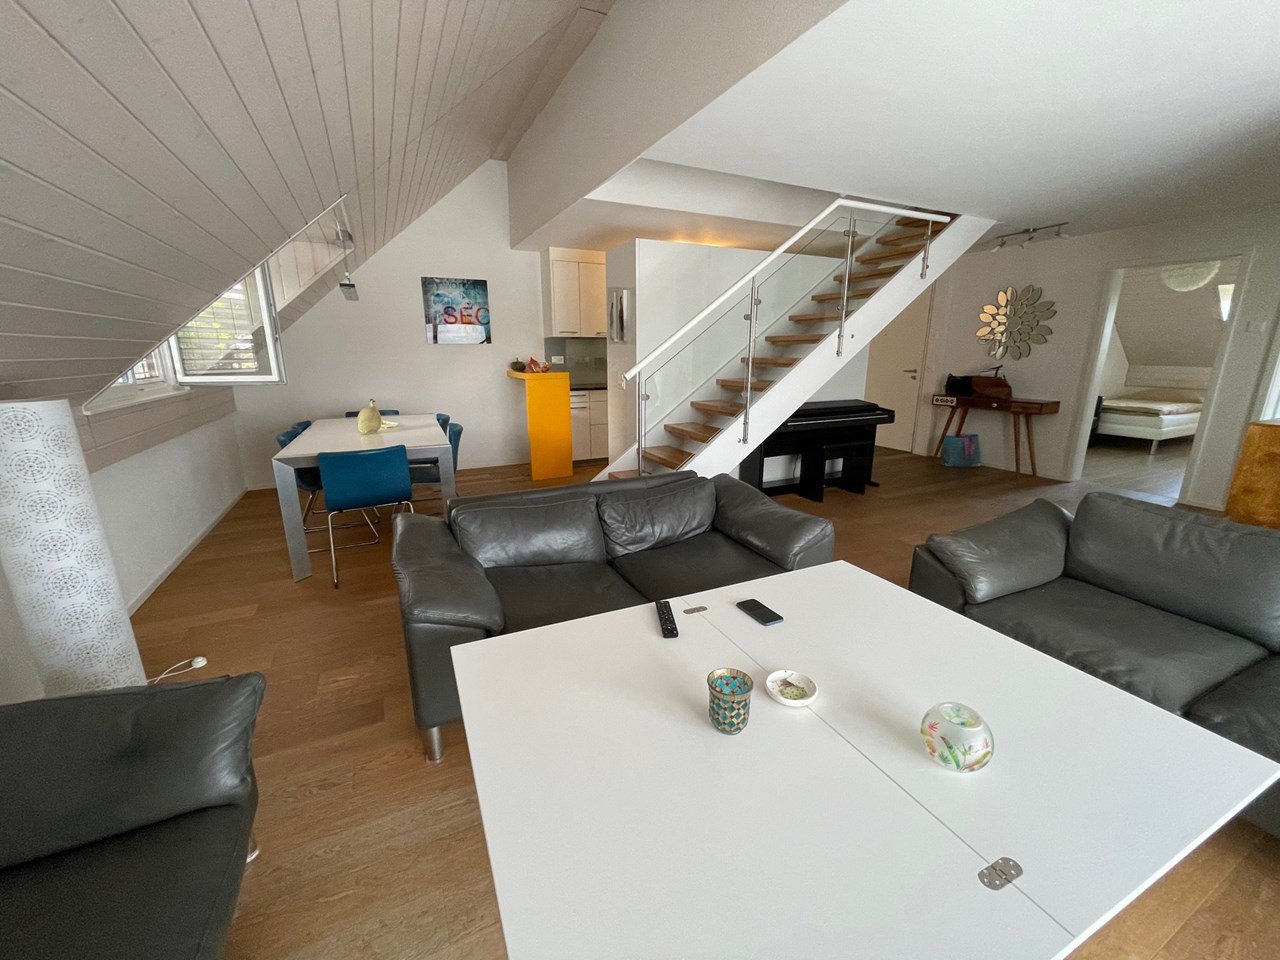 À vendre : Appartement 3 chambres Aclens - Ref : 1338 | Naef Immobilier